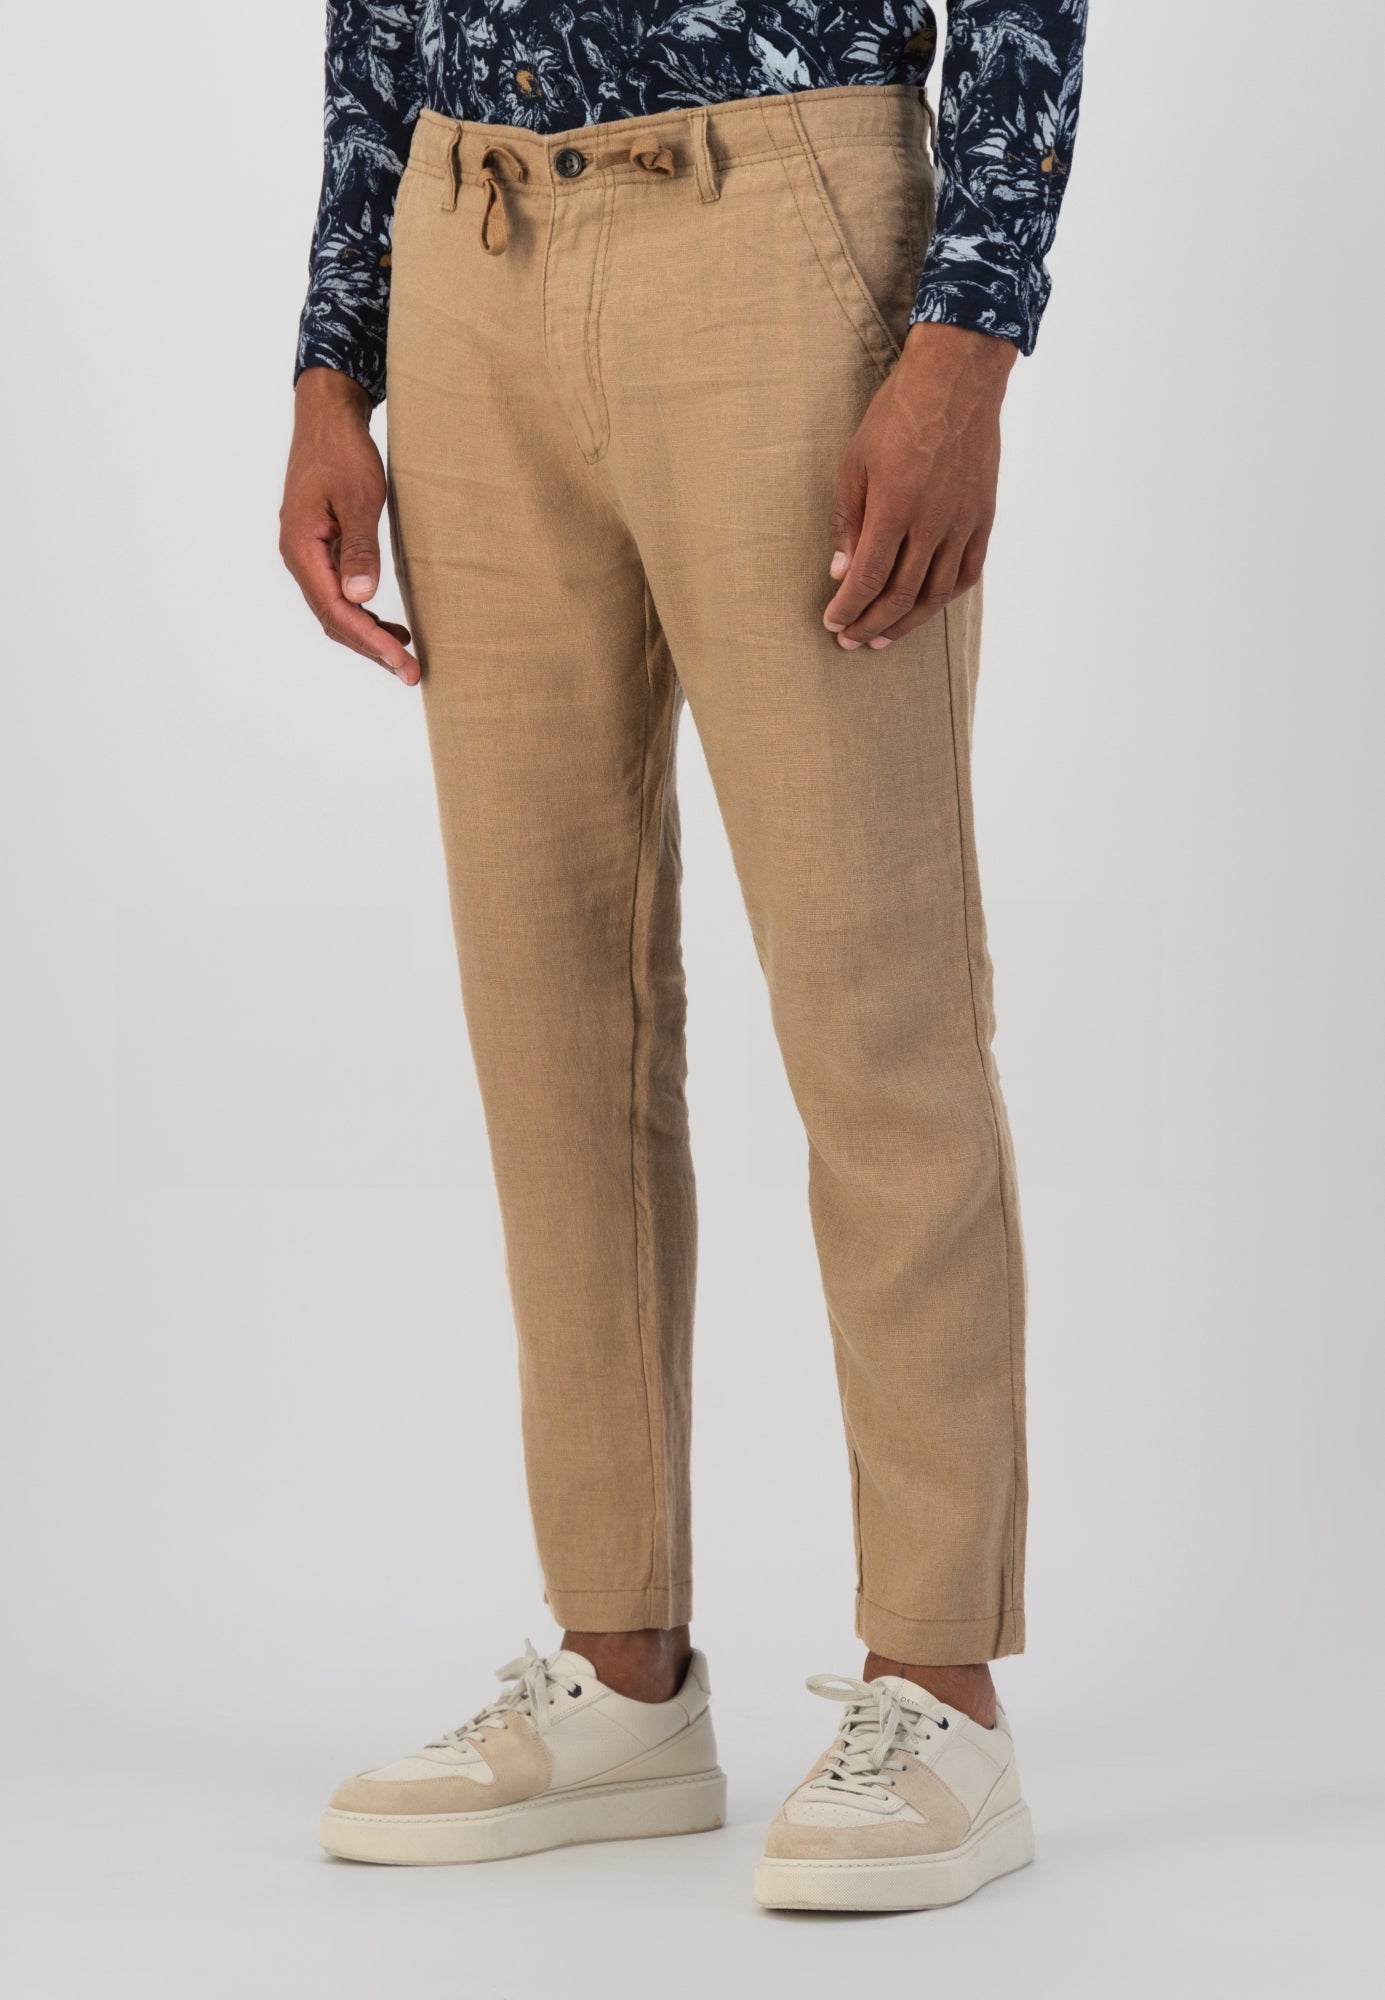 WASHED HEAVY CHINO WIDE PANTS  AURALEE Official Website